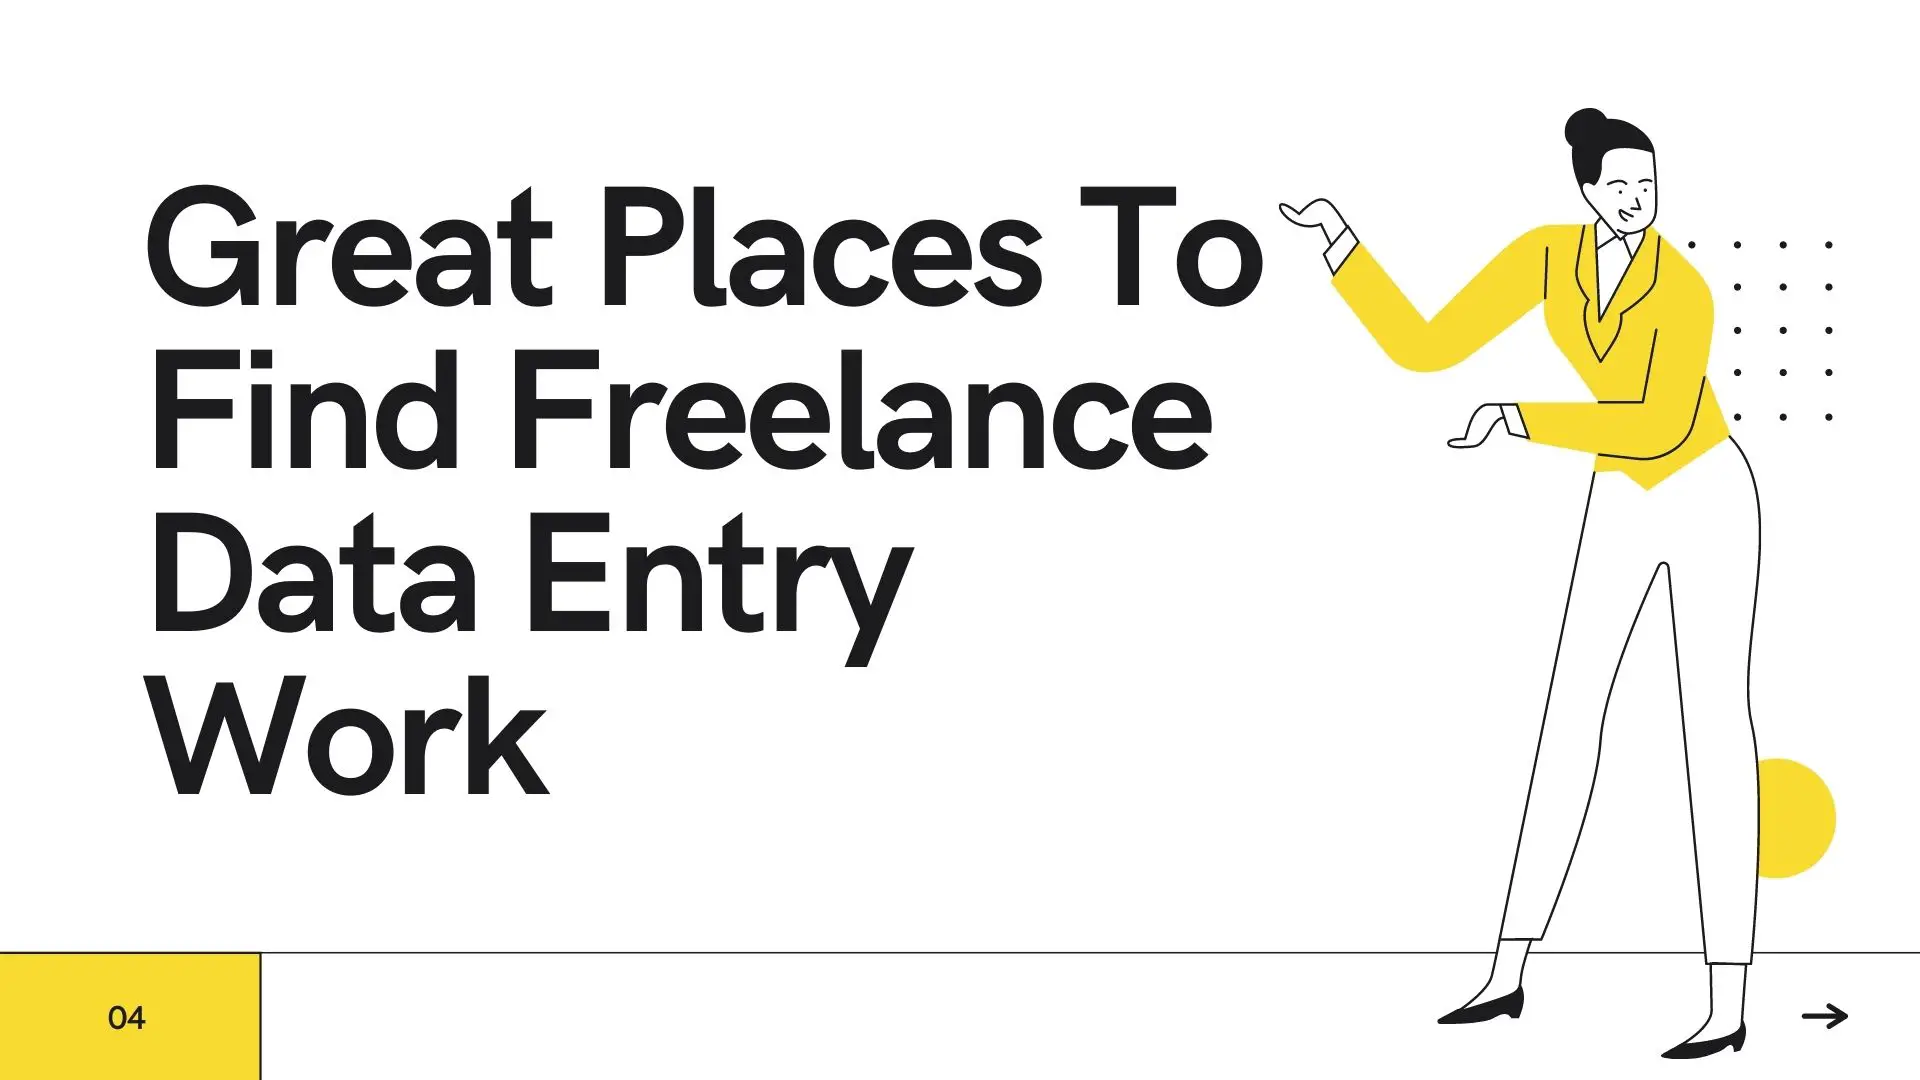 Great Places To Find Freelance Data Entry Work